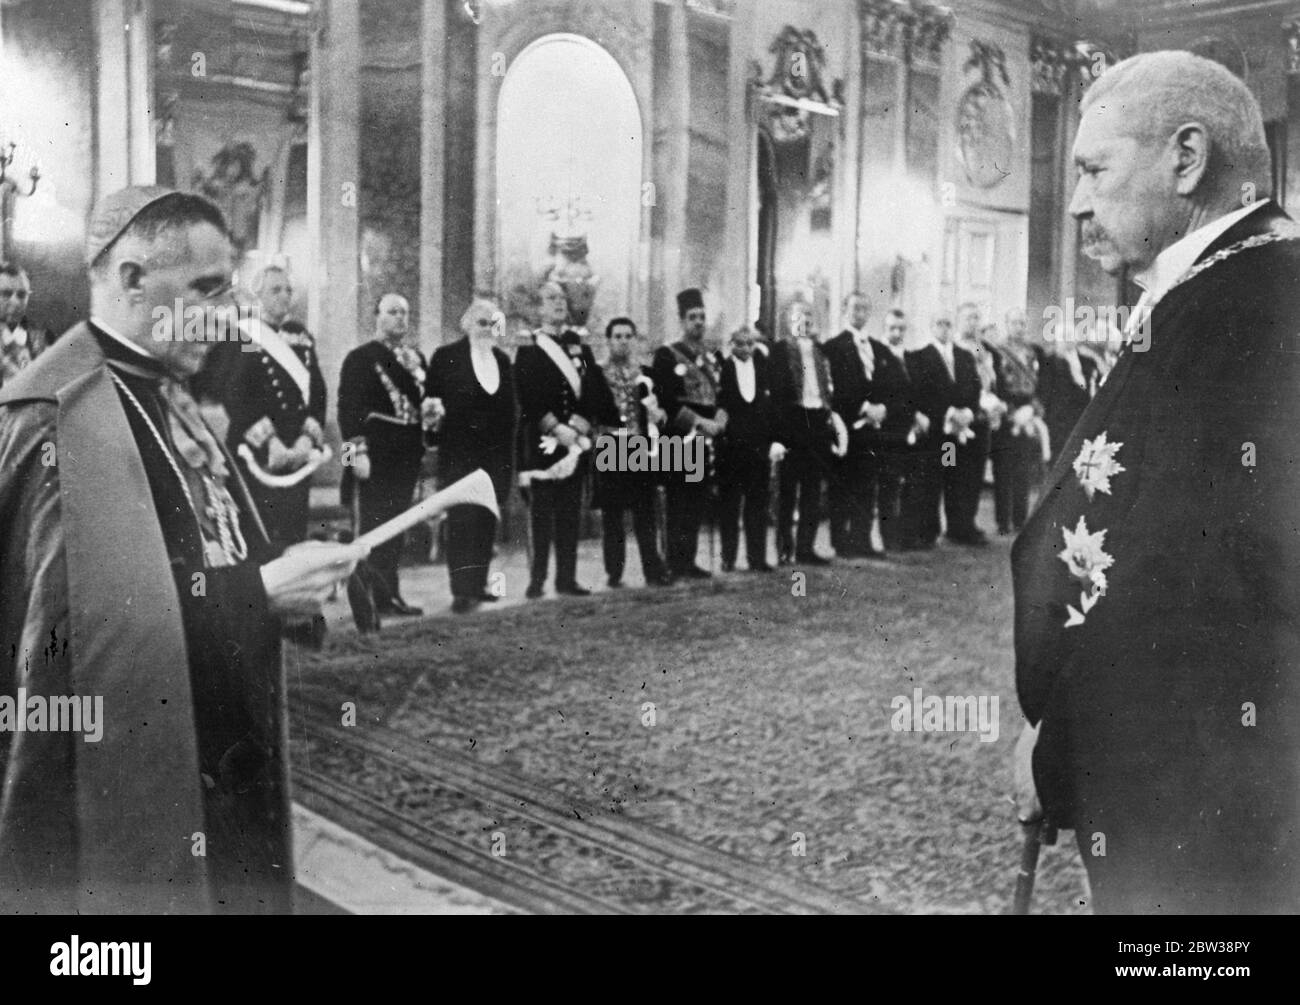 Diplomatic Corps ' New Year greetings to President Von Hindenburg . Members of the Diplomatic Corps in Berlin visited the Presidential Palace to convey New Year greetings to President von Hindenburg , at the customary reception . Photo shows ; President von Hindenburg listening to the speech of New Year greetings read by the doyen of the Diplomatic Corps , Monseignor Orsenigo , Papal Nuncio . 3 January 1934 Stock Photo